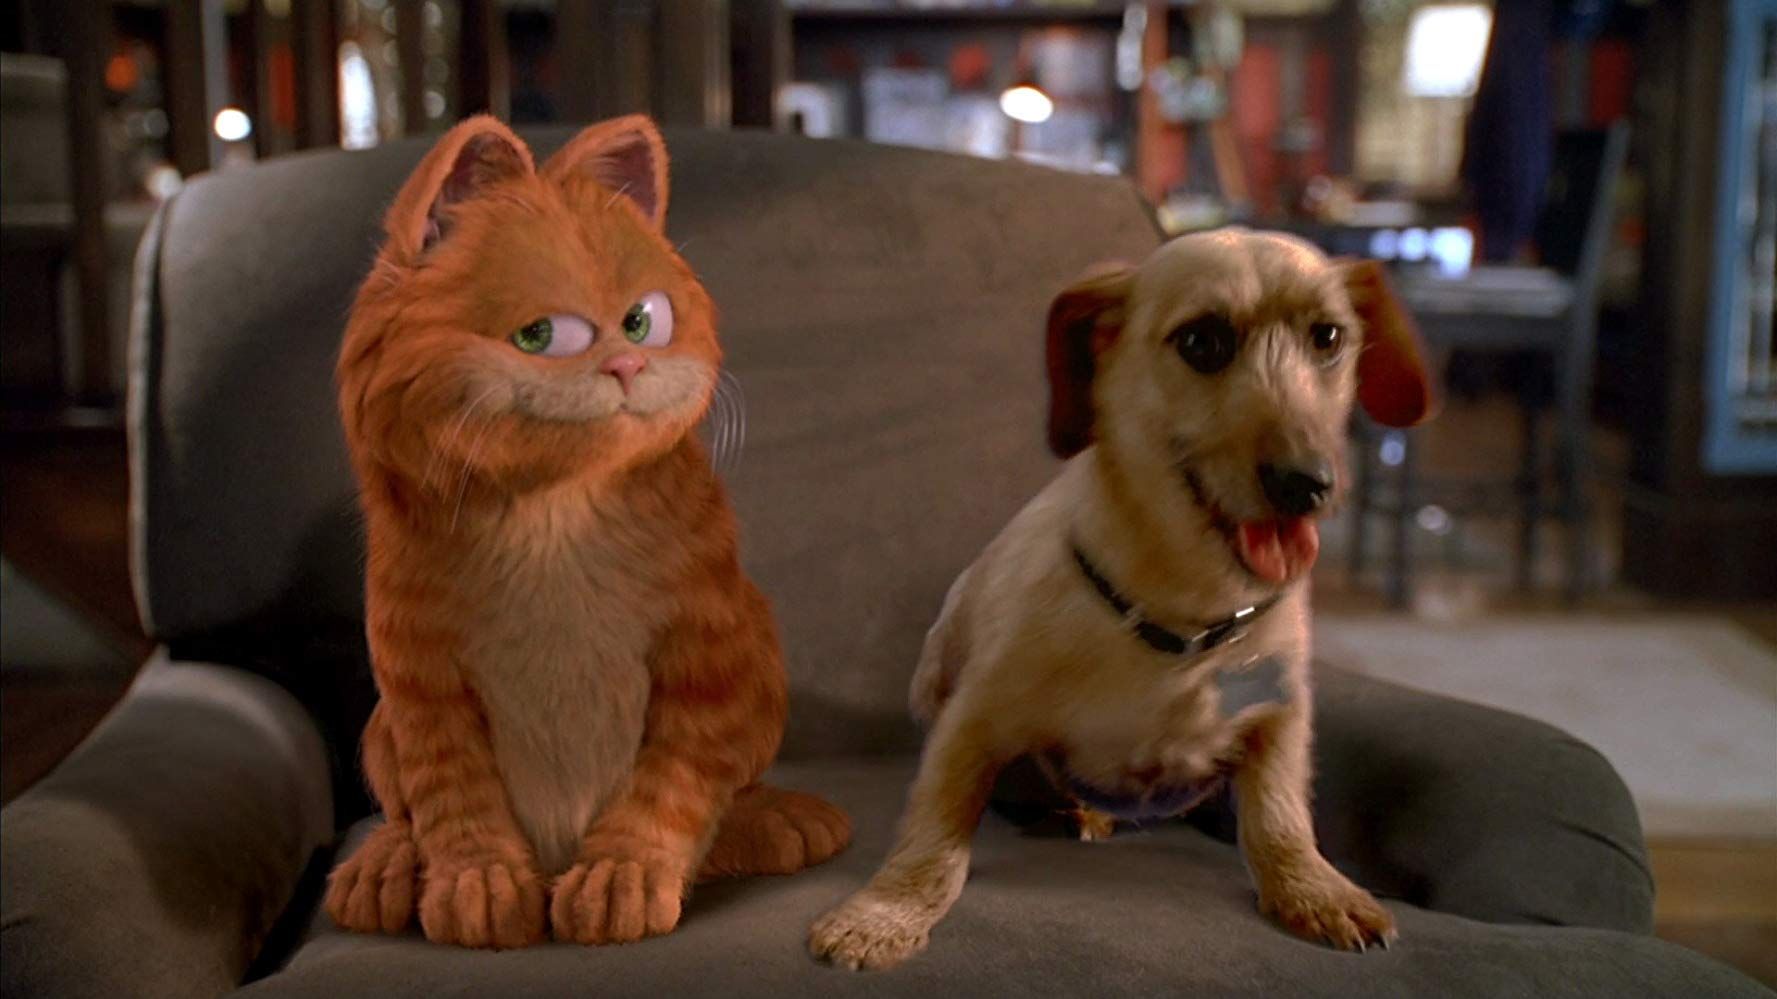 Garfields dog: What breed was Odie actually?